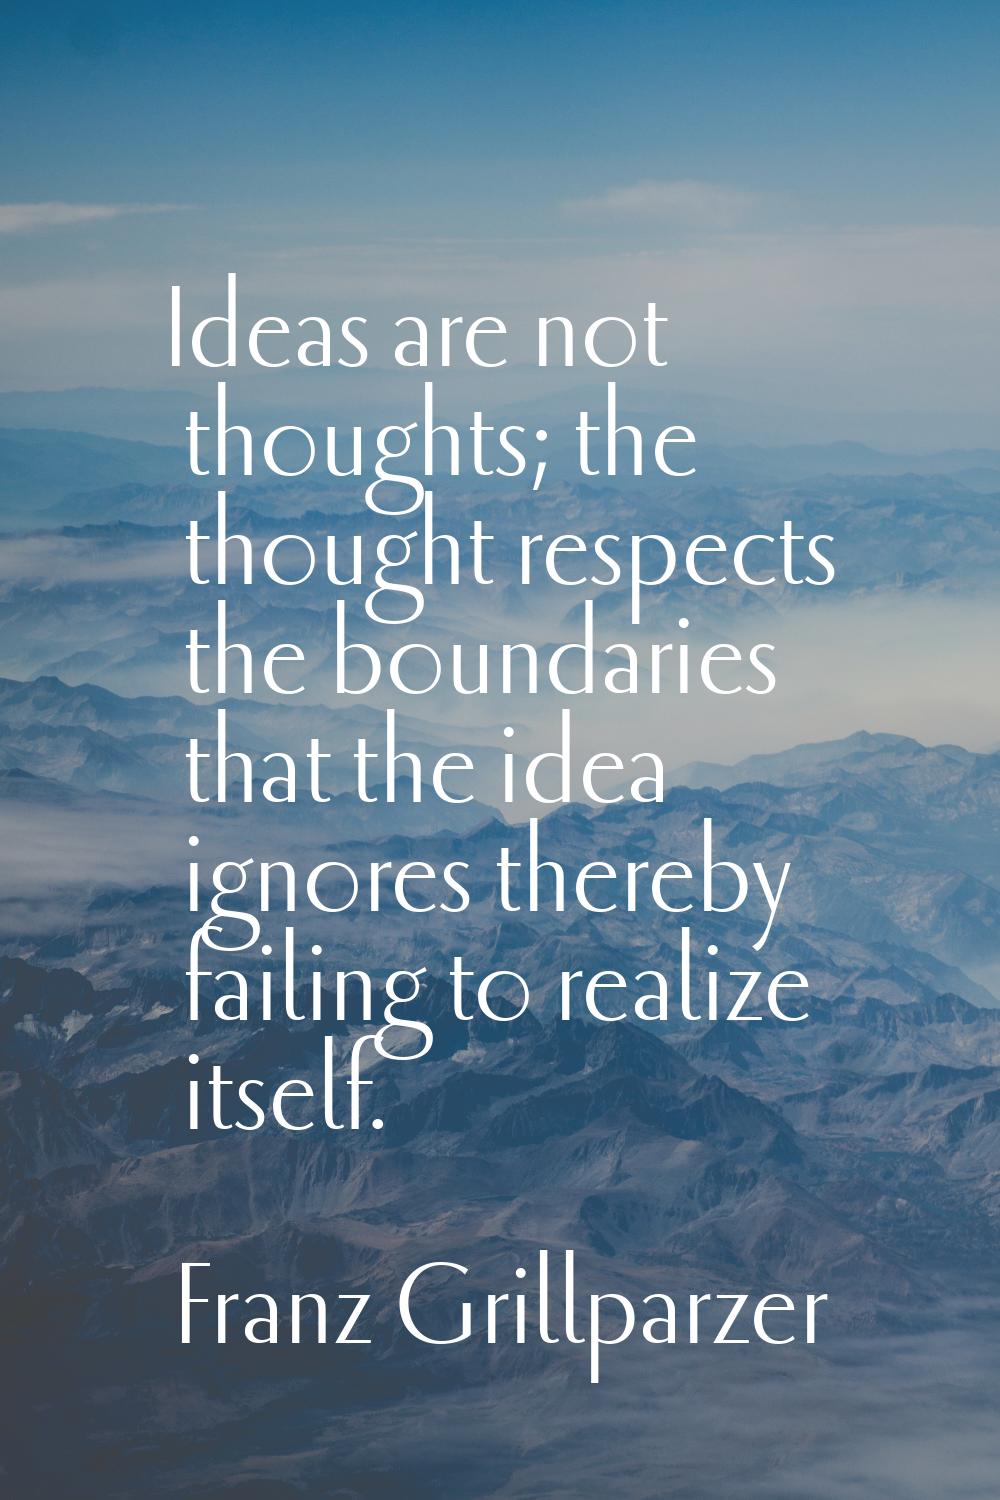 Ideas are not thoughts; the thought respects the boundaries that the idea ignores thereby failing t